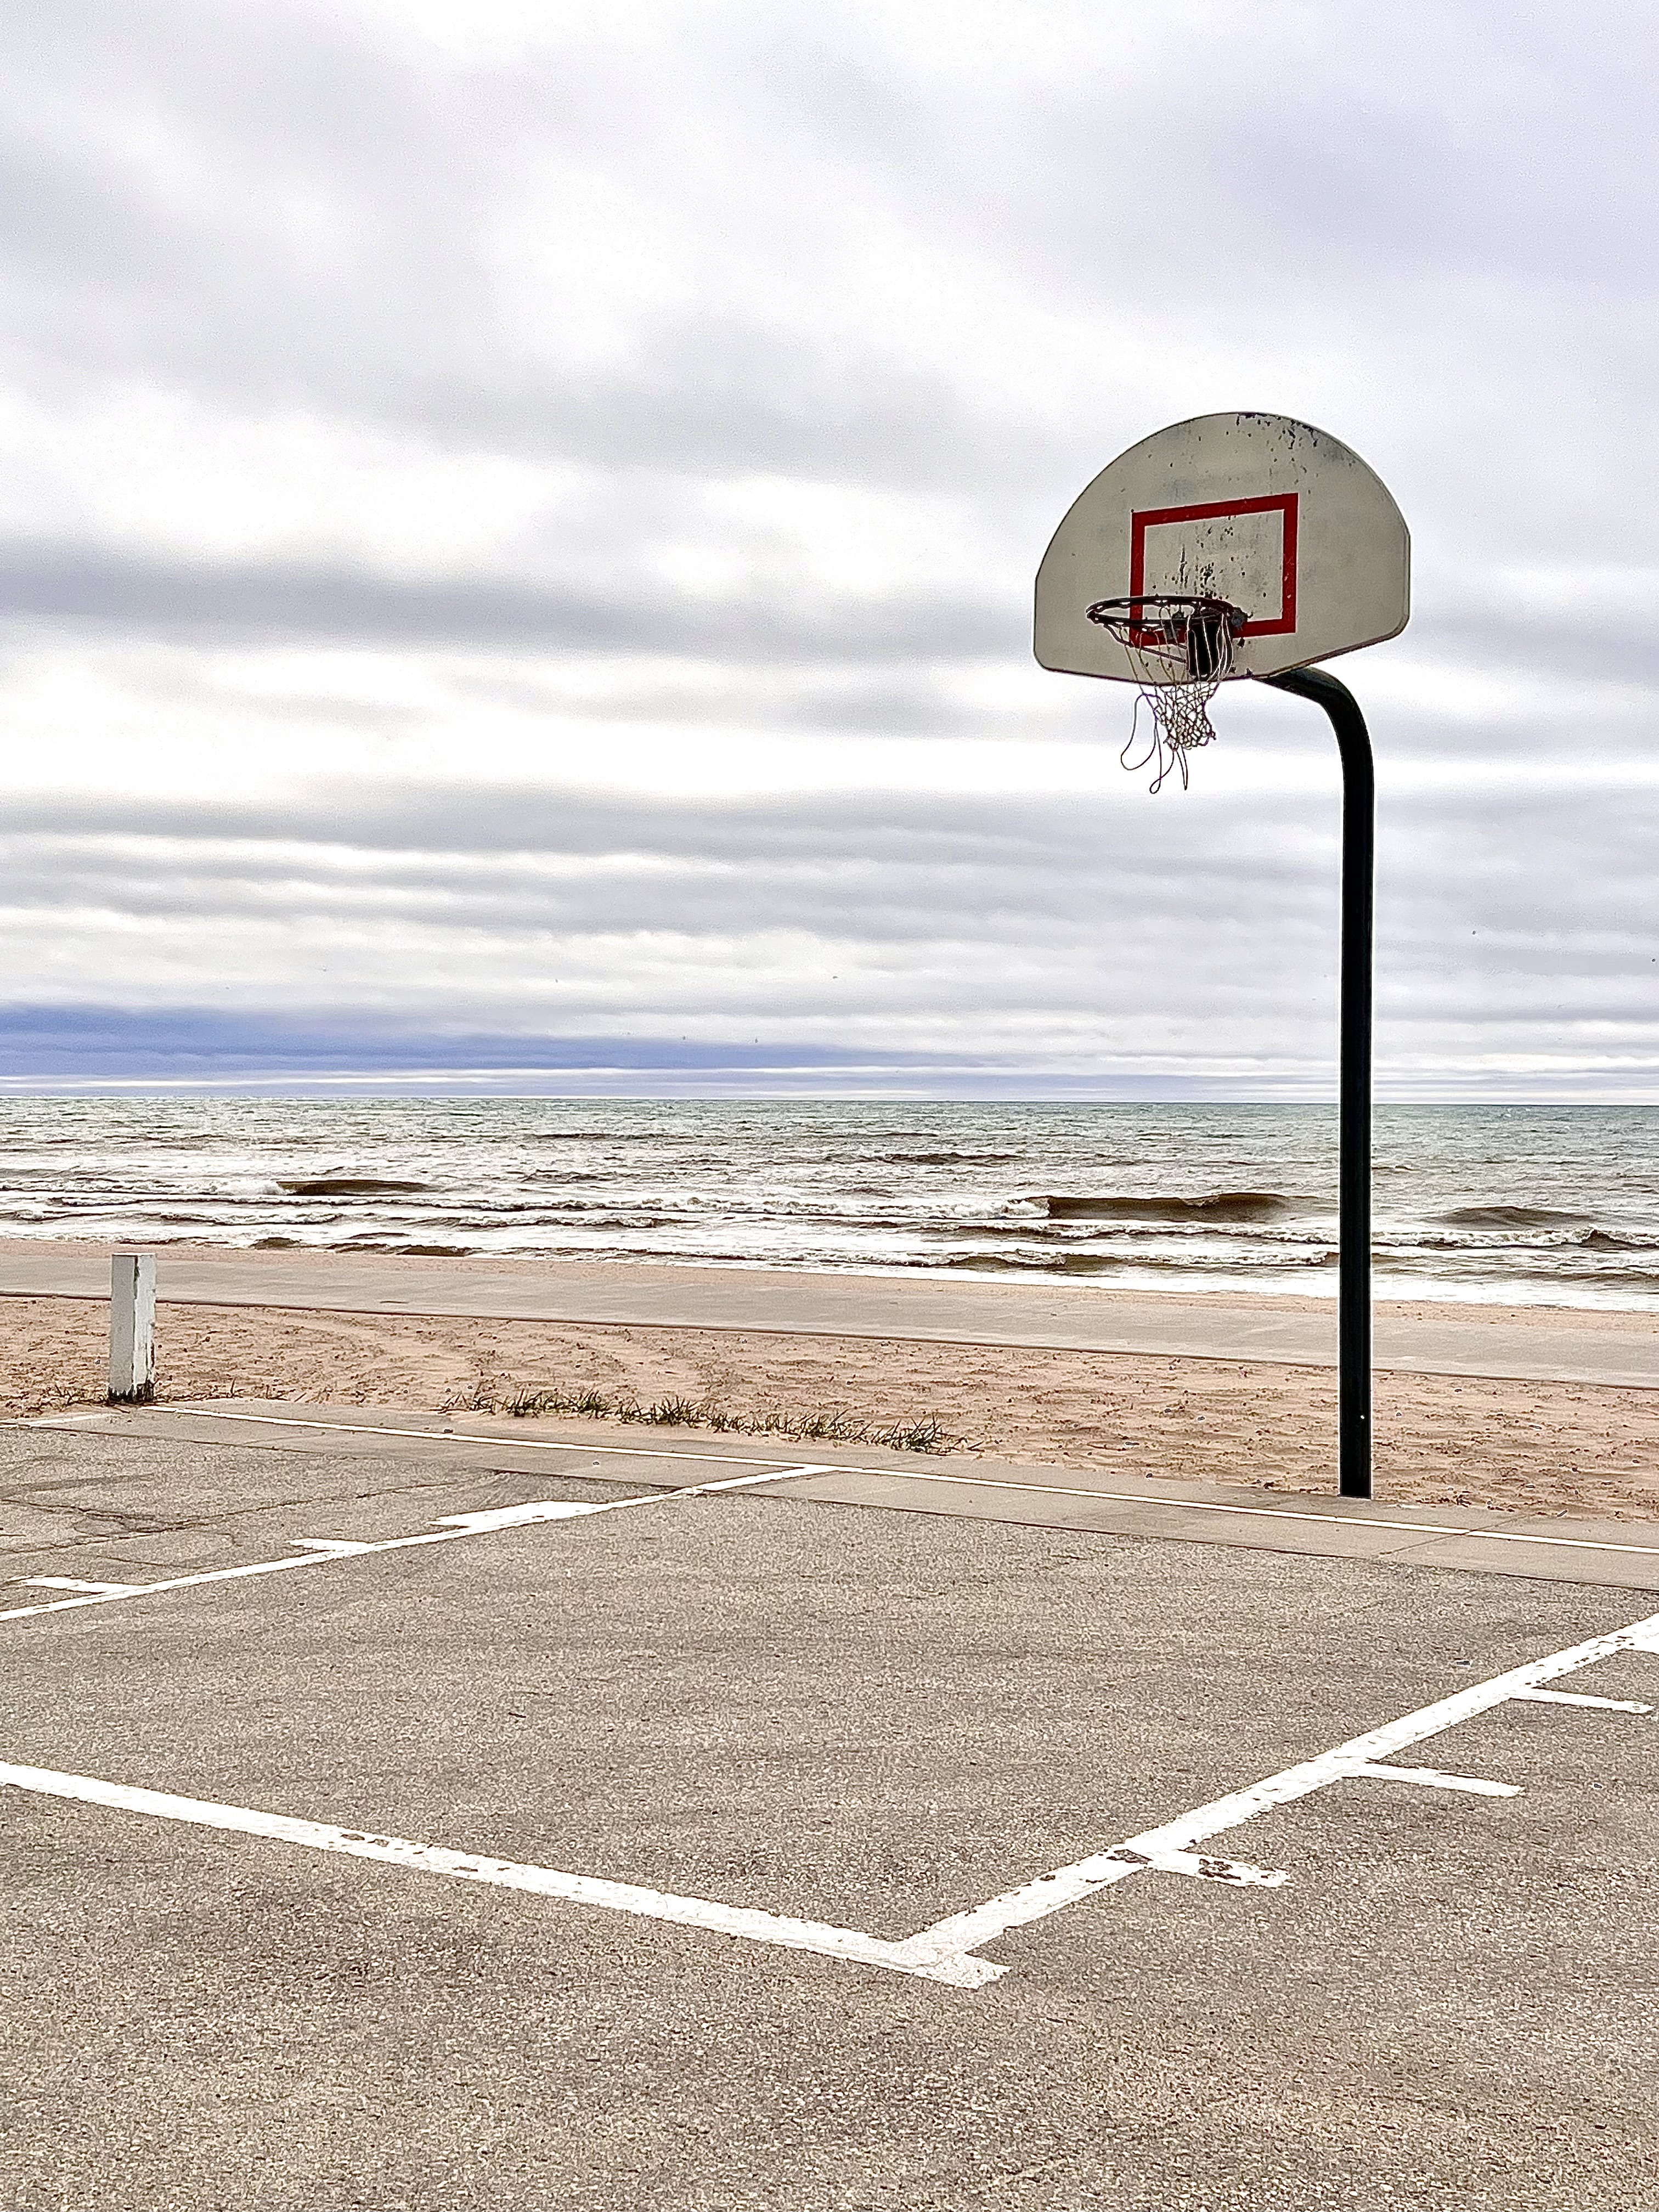 color photograph of basketball net over basketball court with water body and cloudy skyline behind it